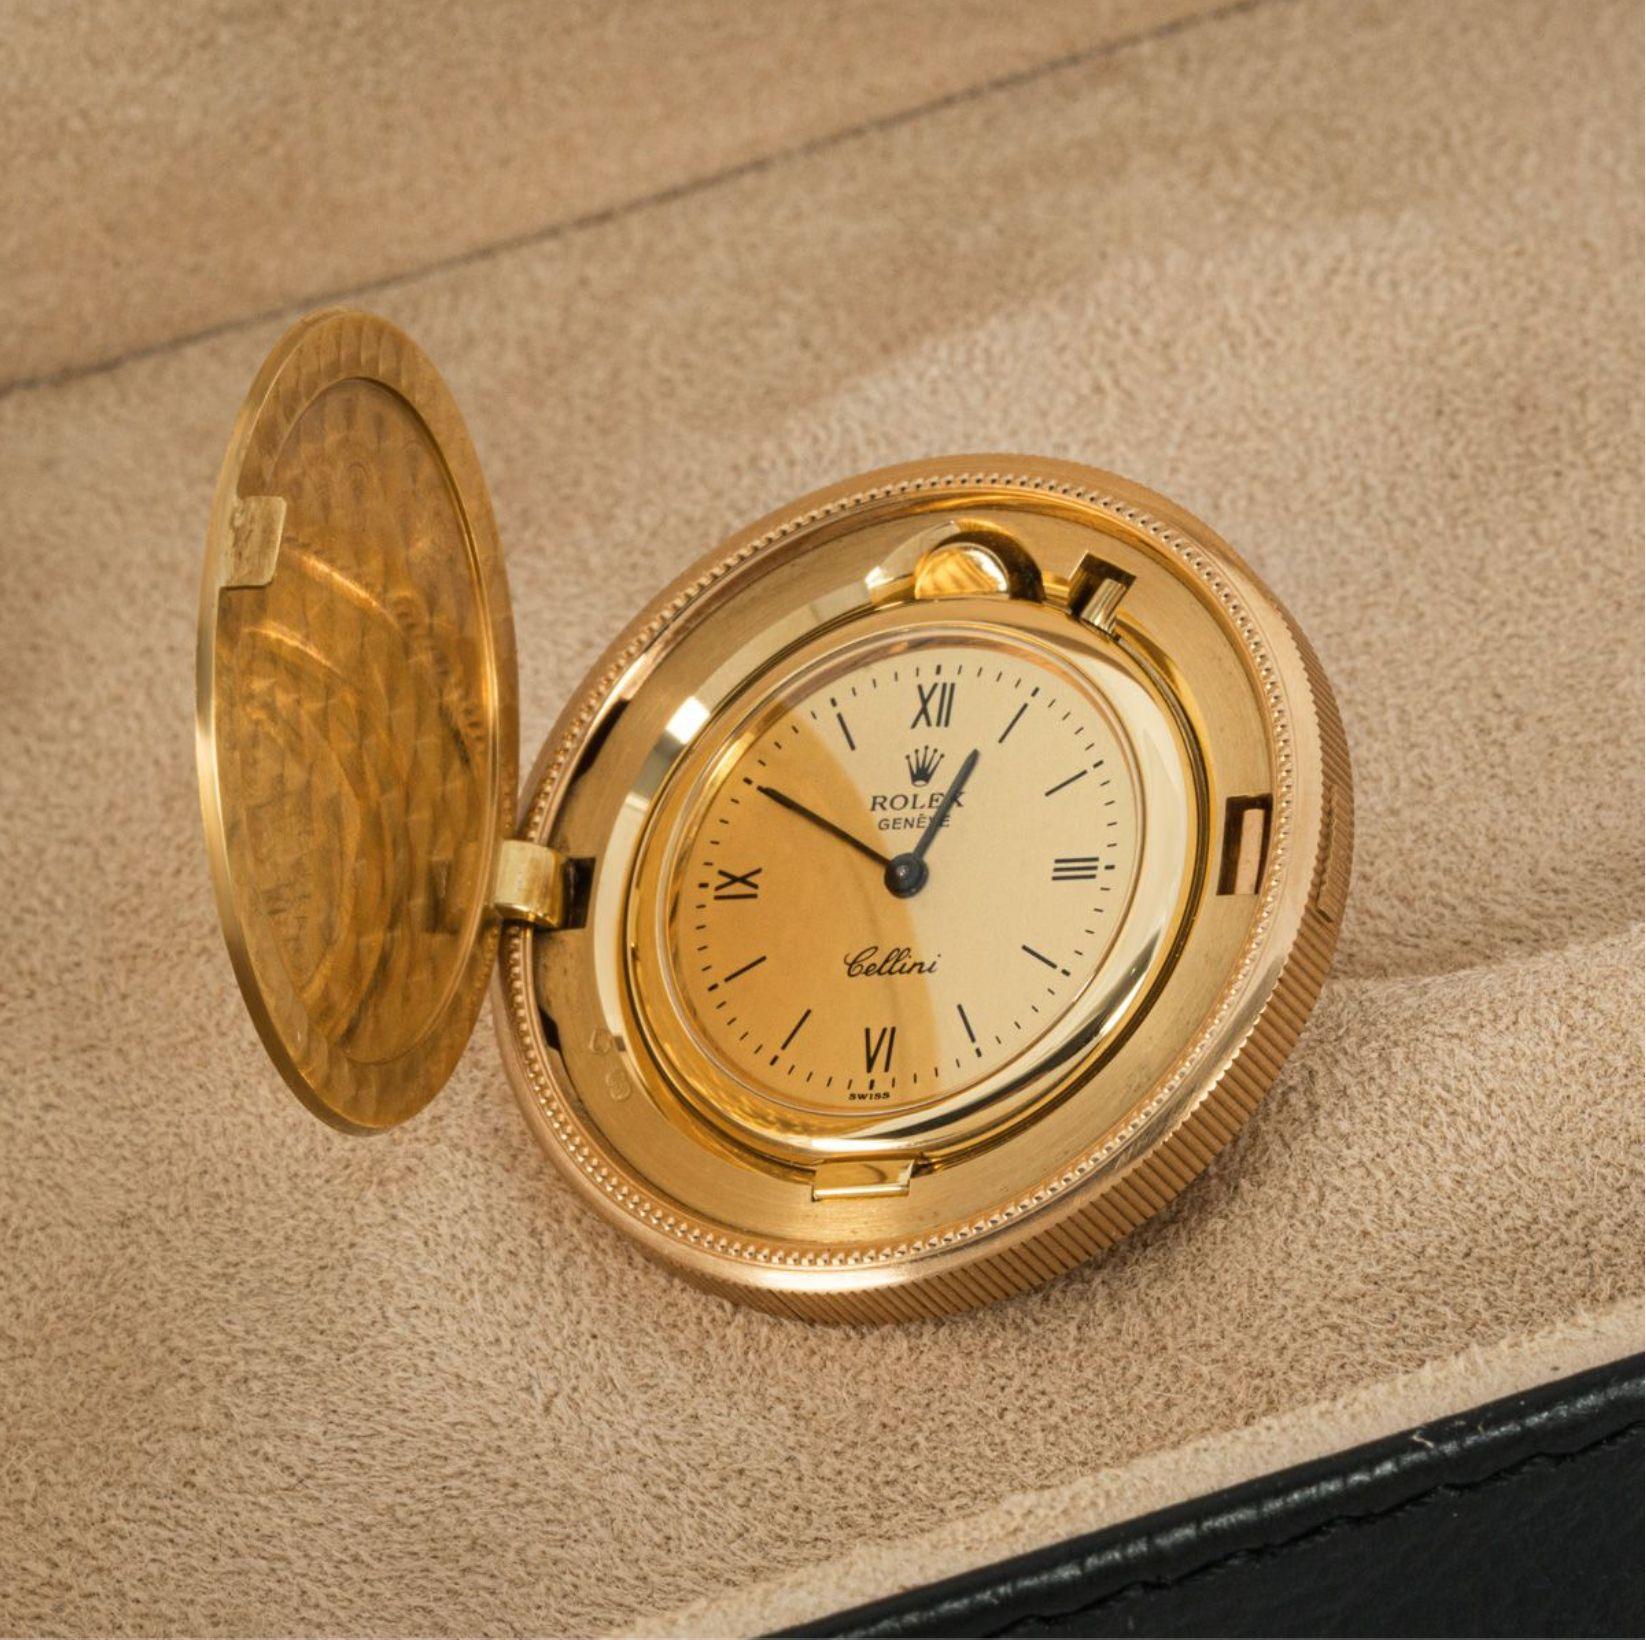 A Rare, Rolex Cellini Twenty Dollar 24ct & 18ct yellow gold coin watch, C1995.

Dial: The original champagne dial with black Roman numerals, outer minute track and signed Rolex Genève Cellini.

Case: The rare Twenty Dollar coin in pristine condition